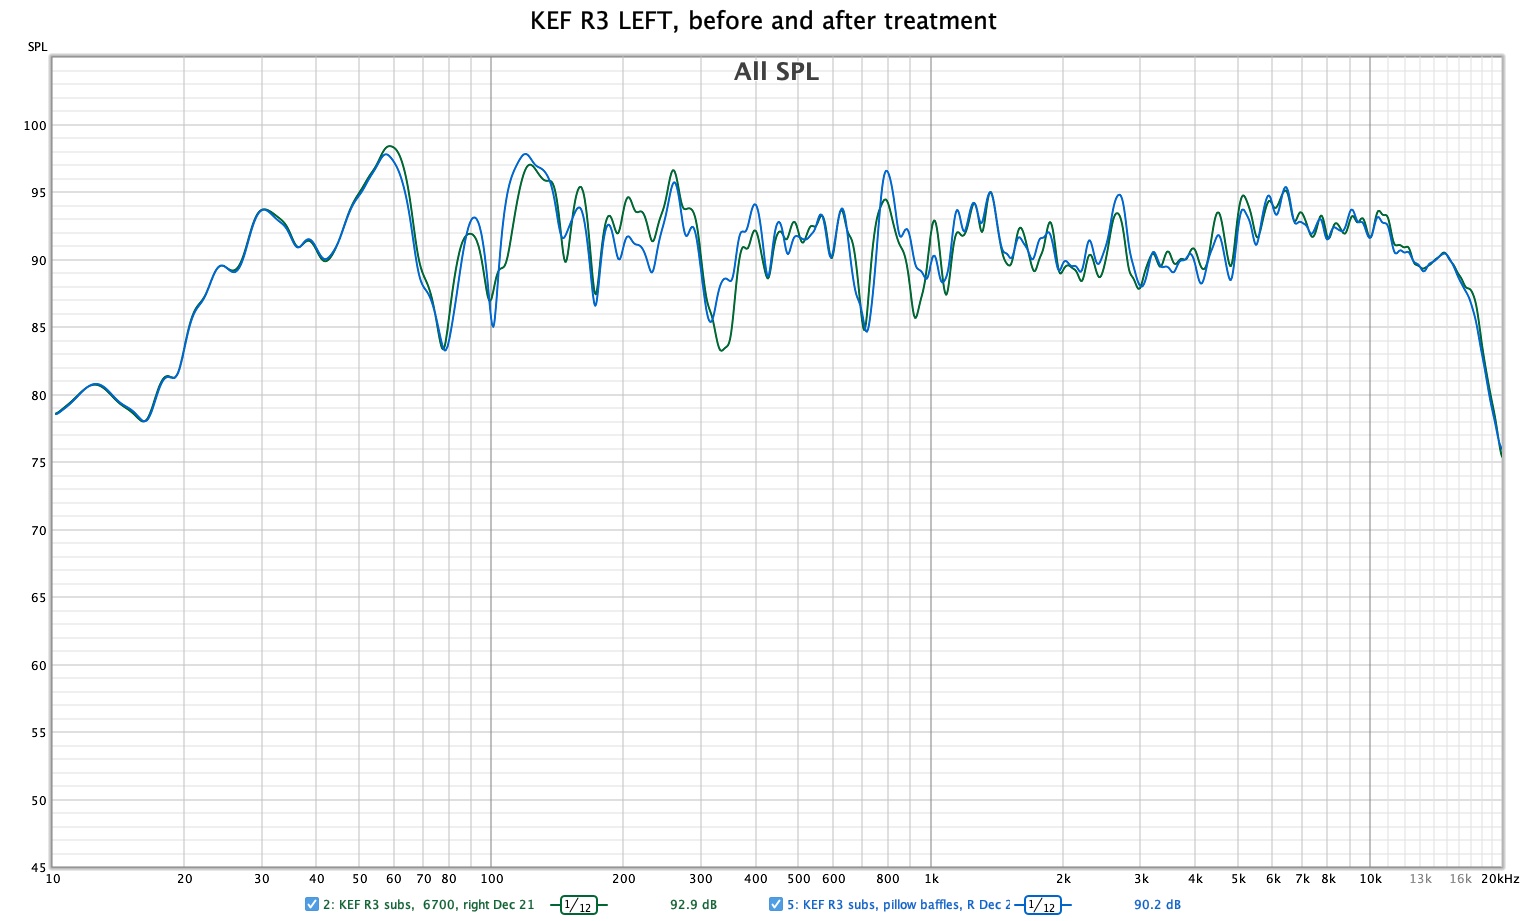 KEF R3 LEFT before after treatment.jpg